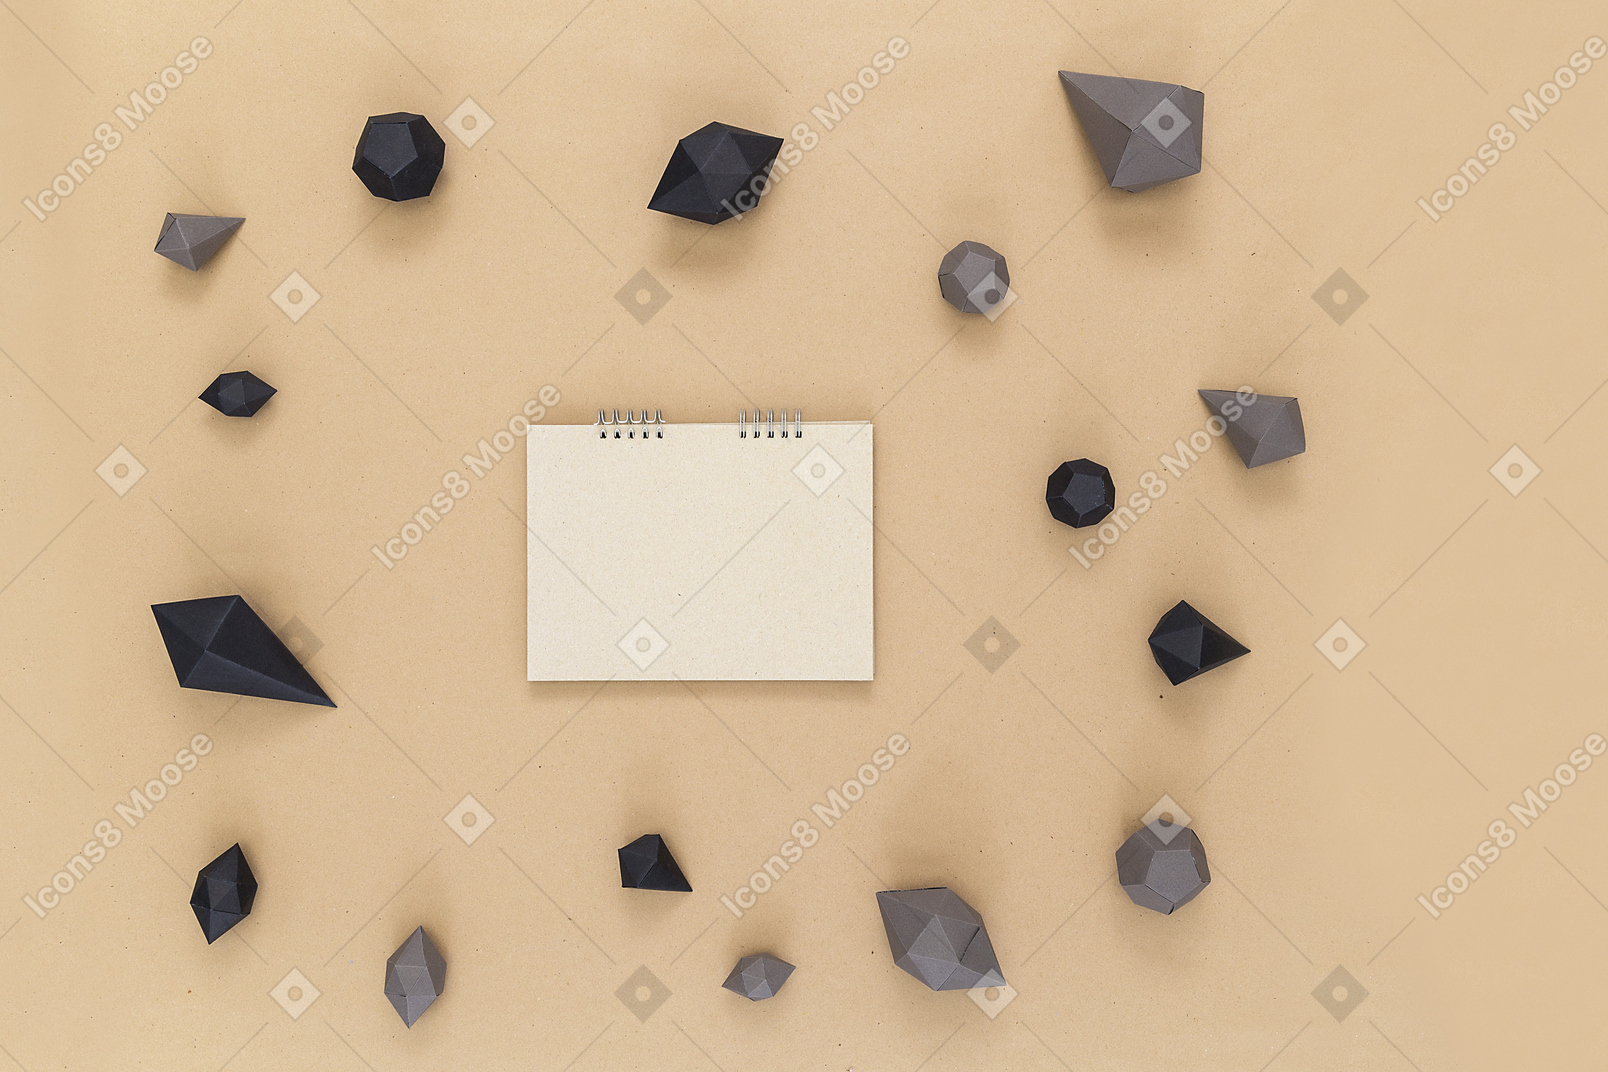 Book lying in the middle of the circle of black and brown objects